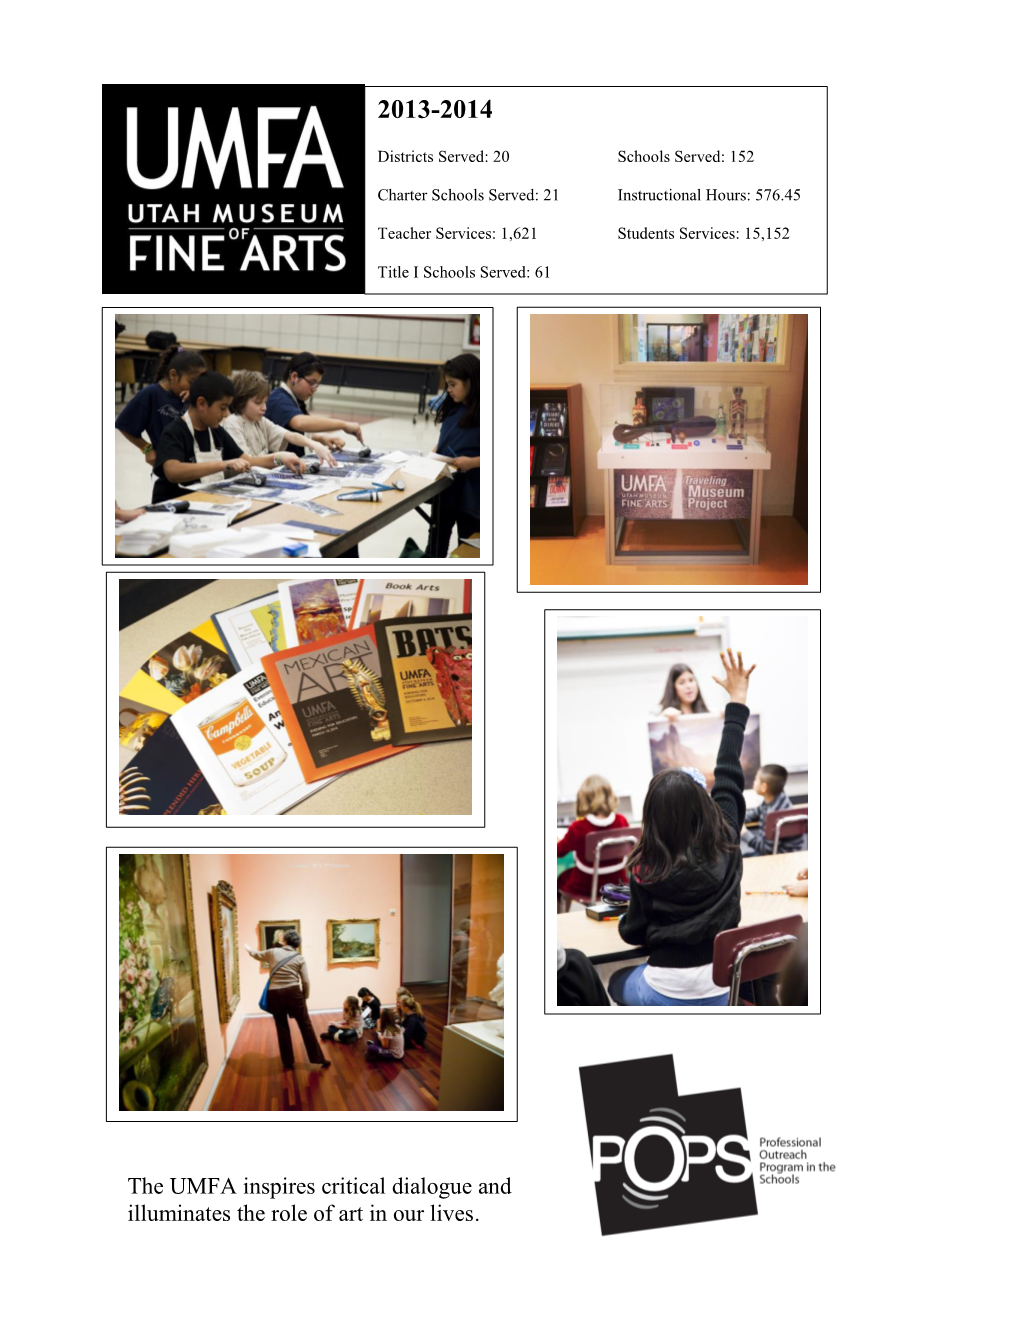 The UMFA Inspires Critical Dialogue and Illuminates the Role of Art in Our Lives